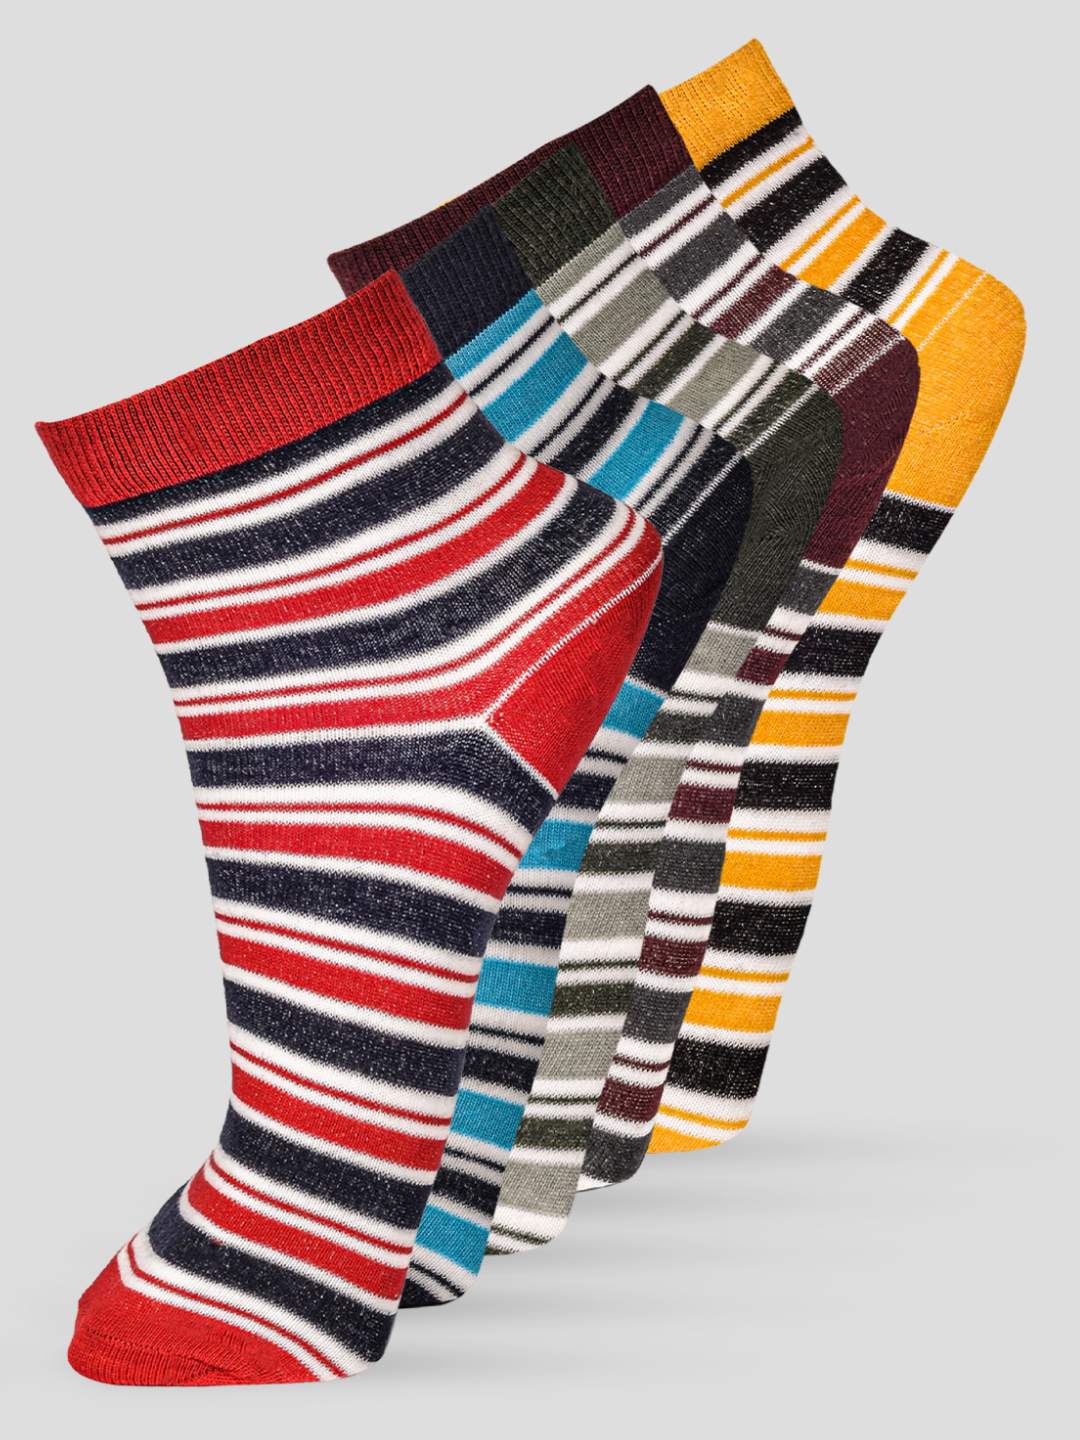 FRENCHIE PO5 STRIPERS ALL OVER DESIGN ANKLE LENGTH CUT ASSORTED COTTON  SOCKS 05